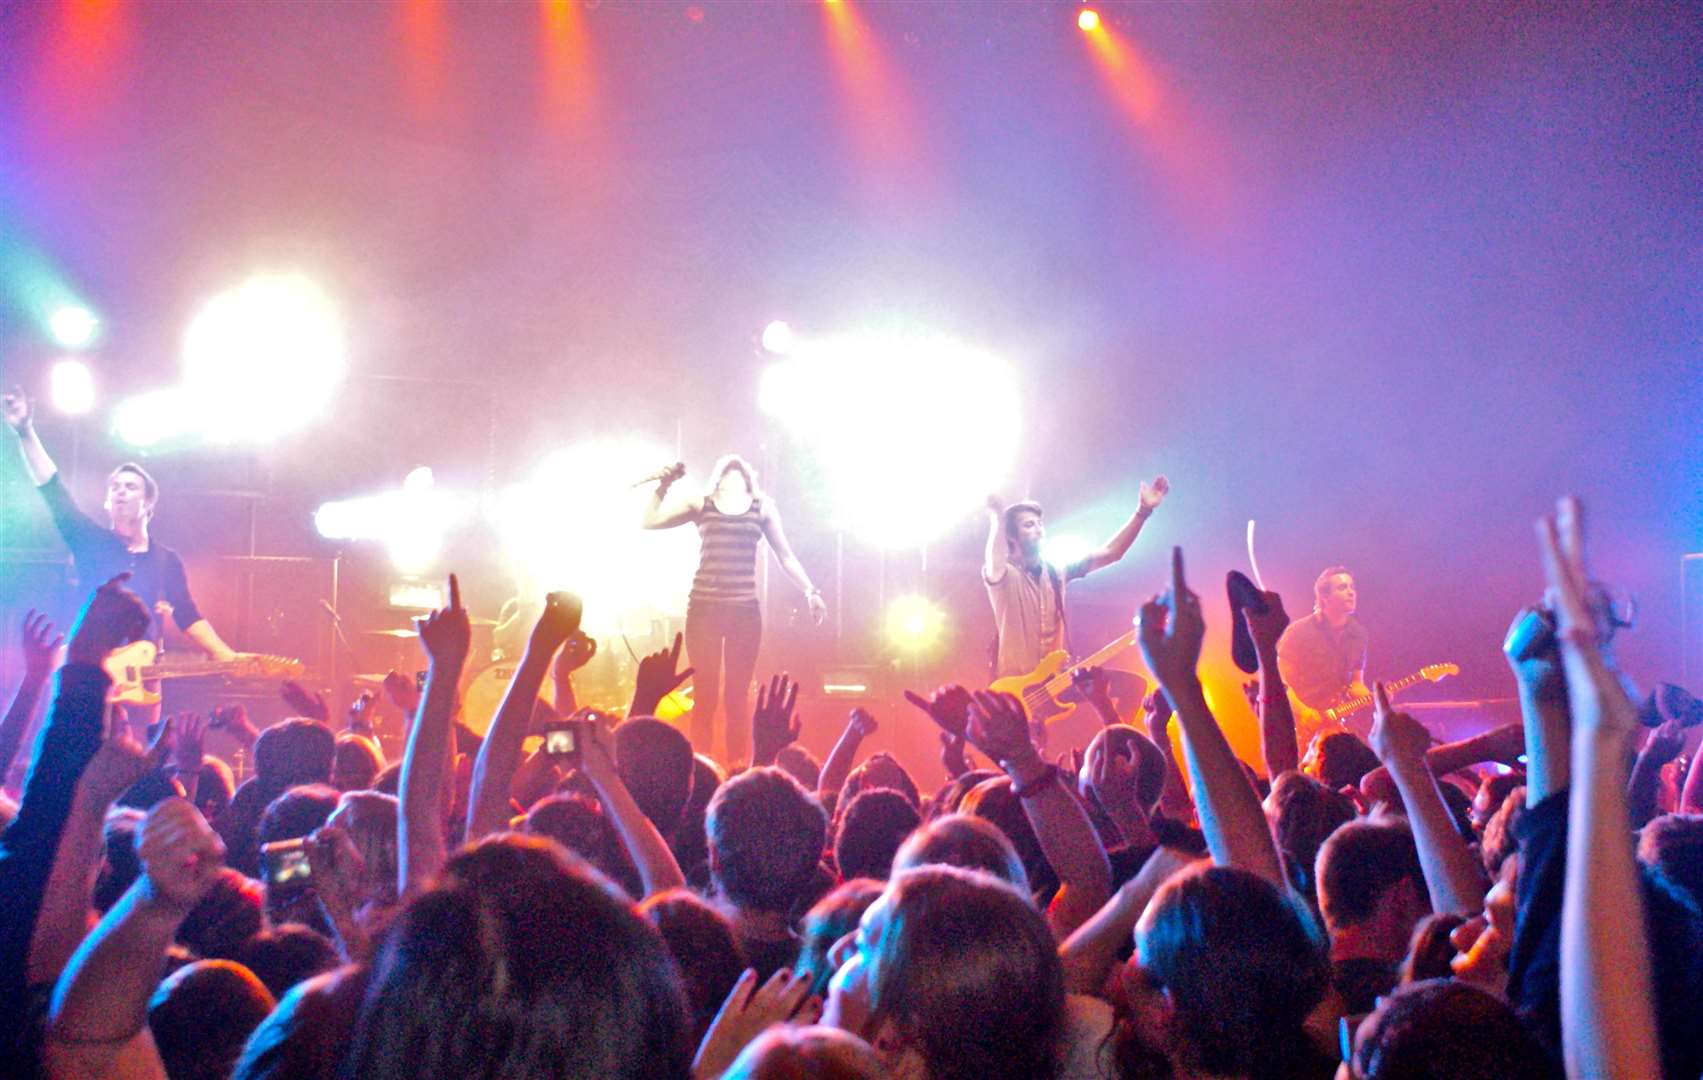 The couple met at a rock concert. Picture: Wikimedia Commons